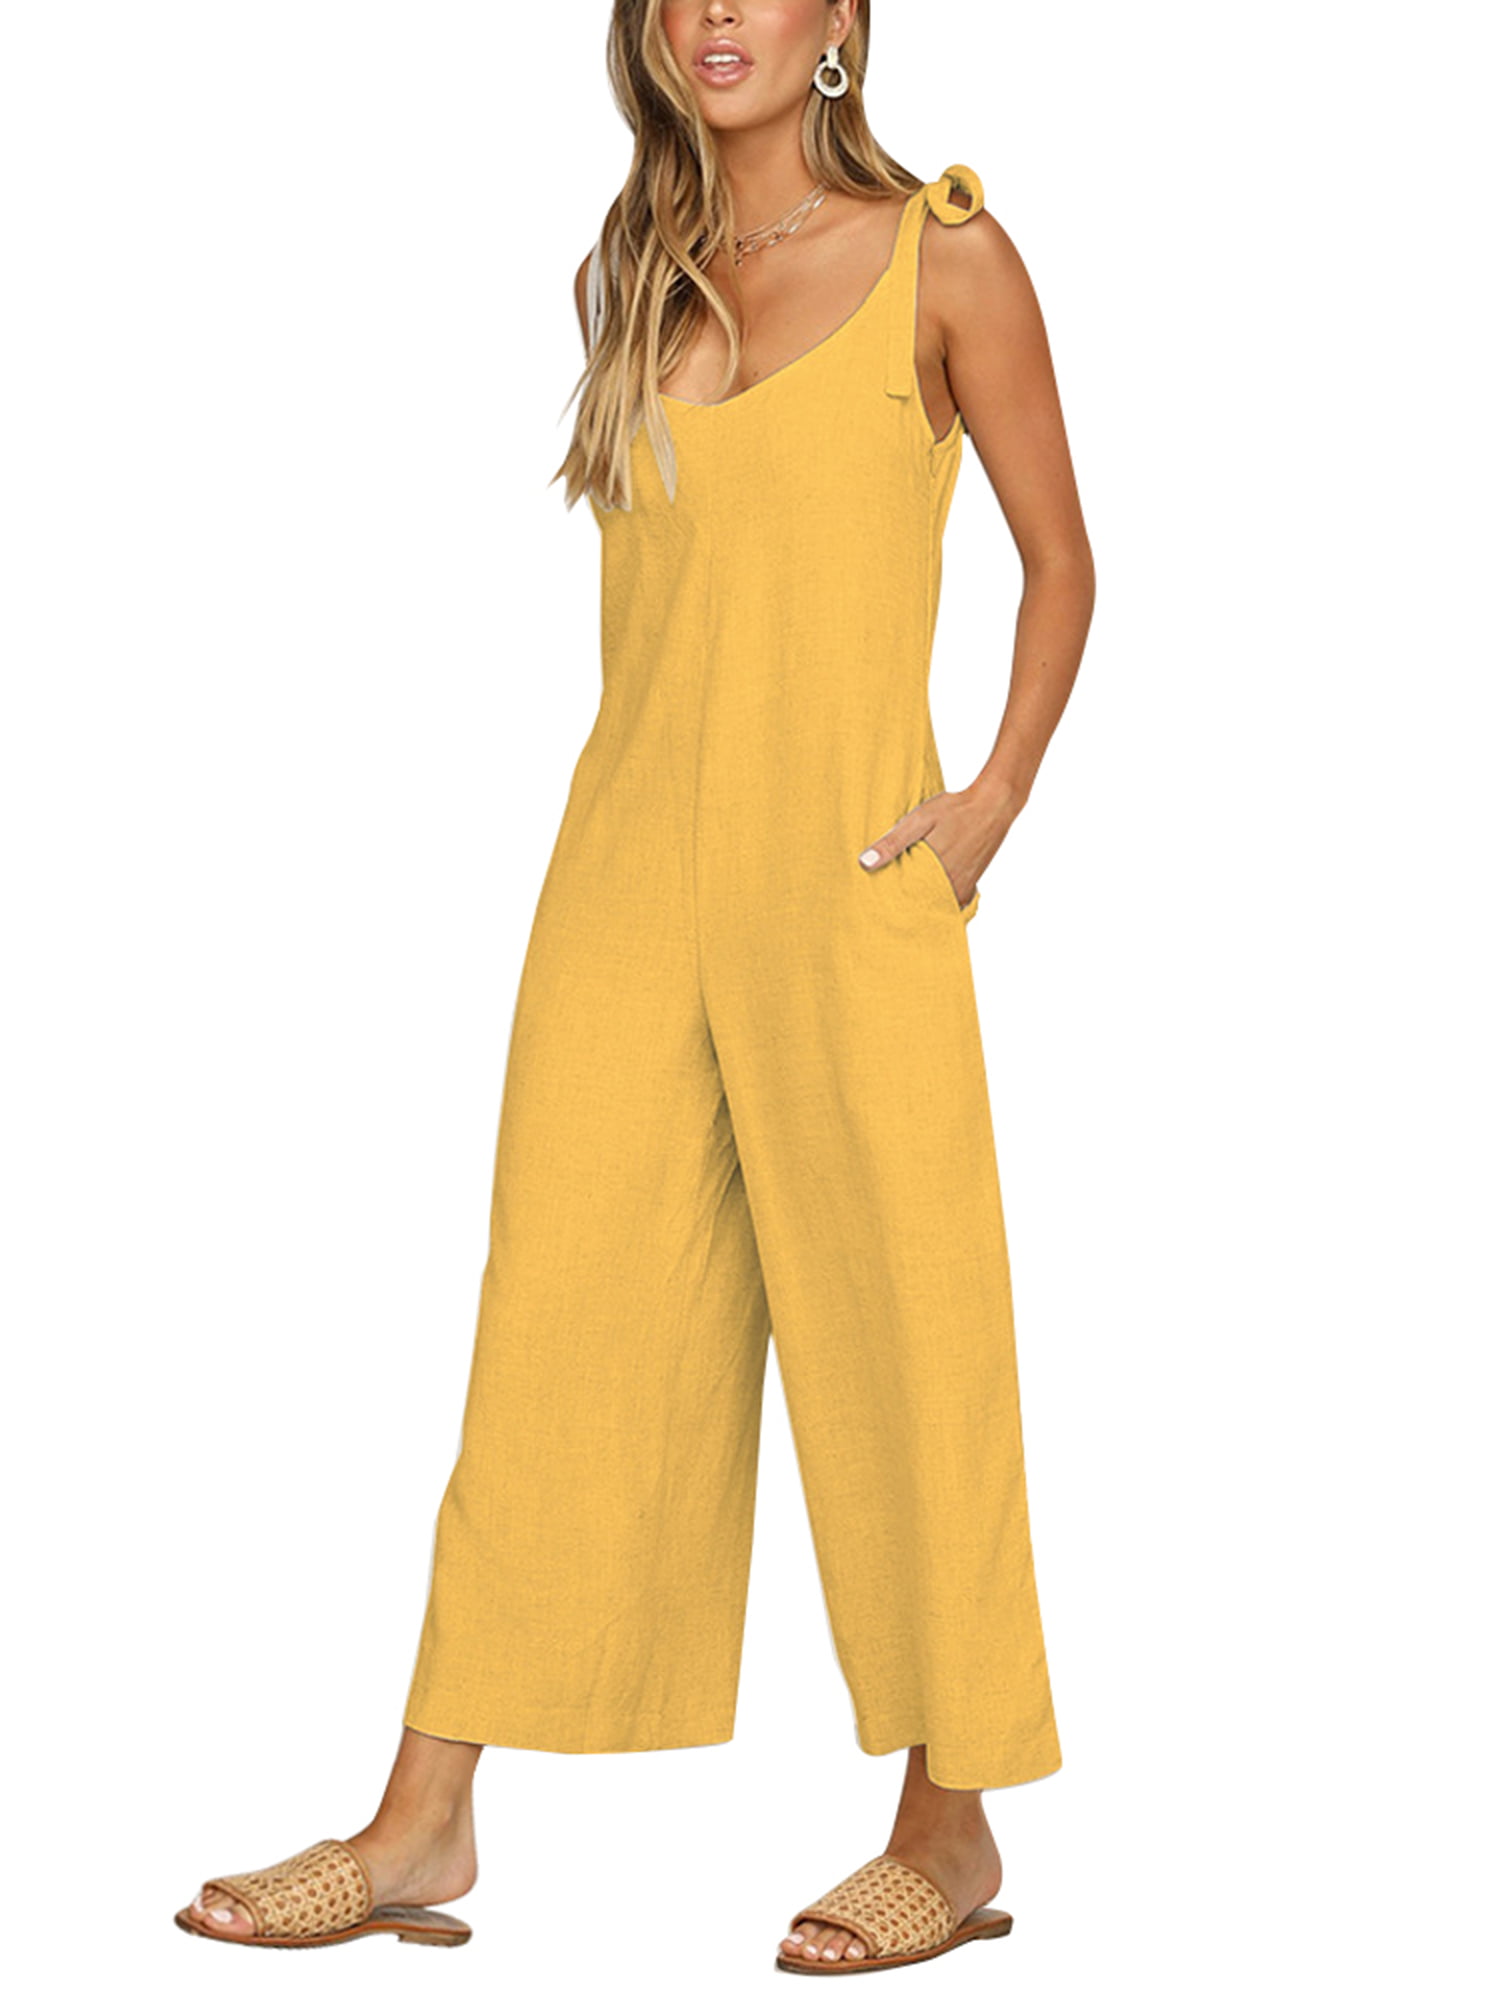 Keaac Womens Jumpsuits Casual Overalls Loose Fit Spaghetti Strap Rompers